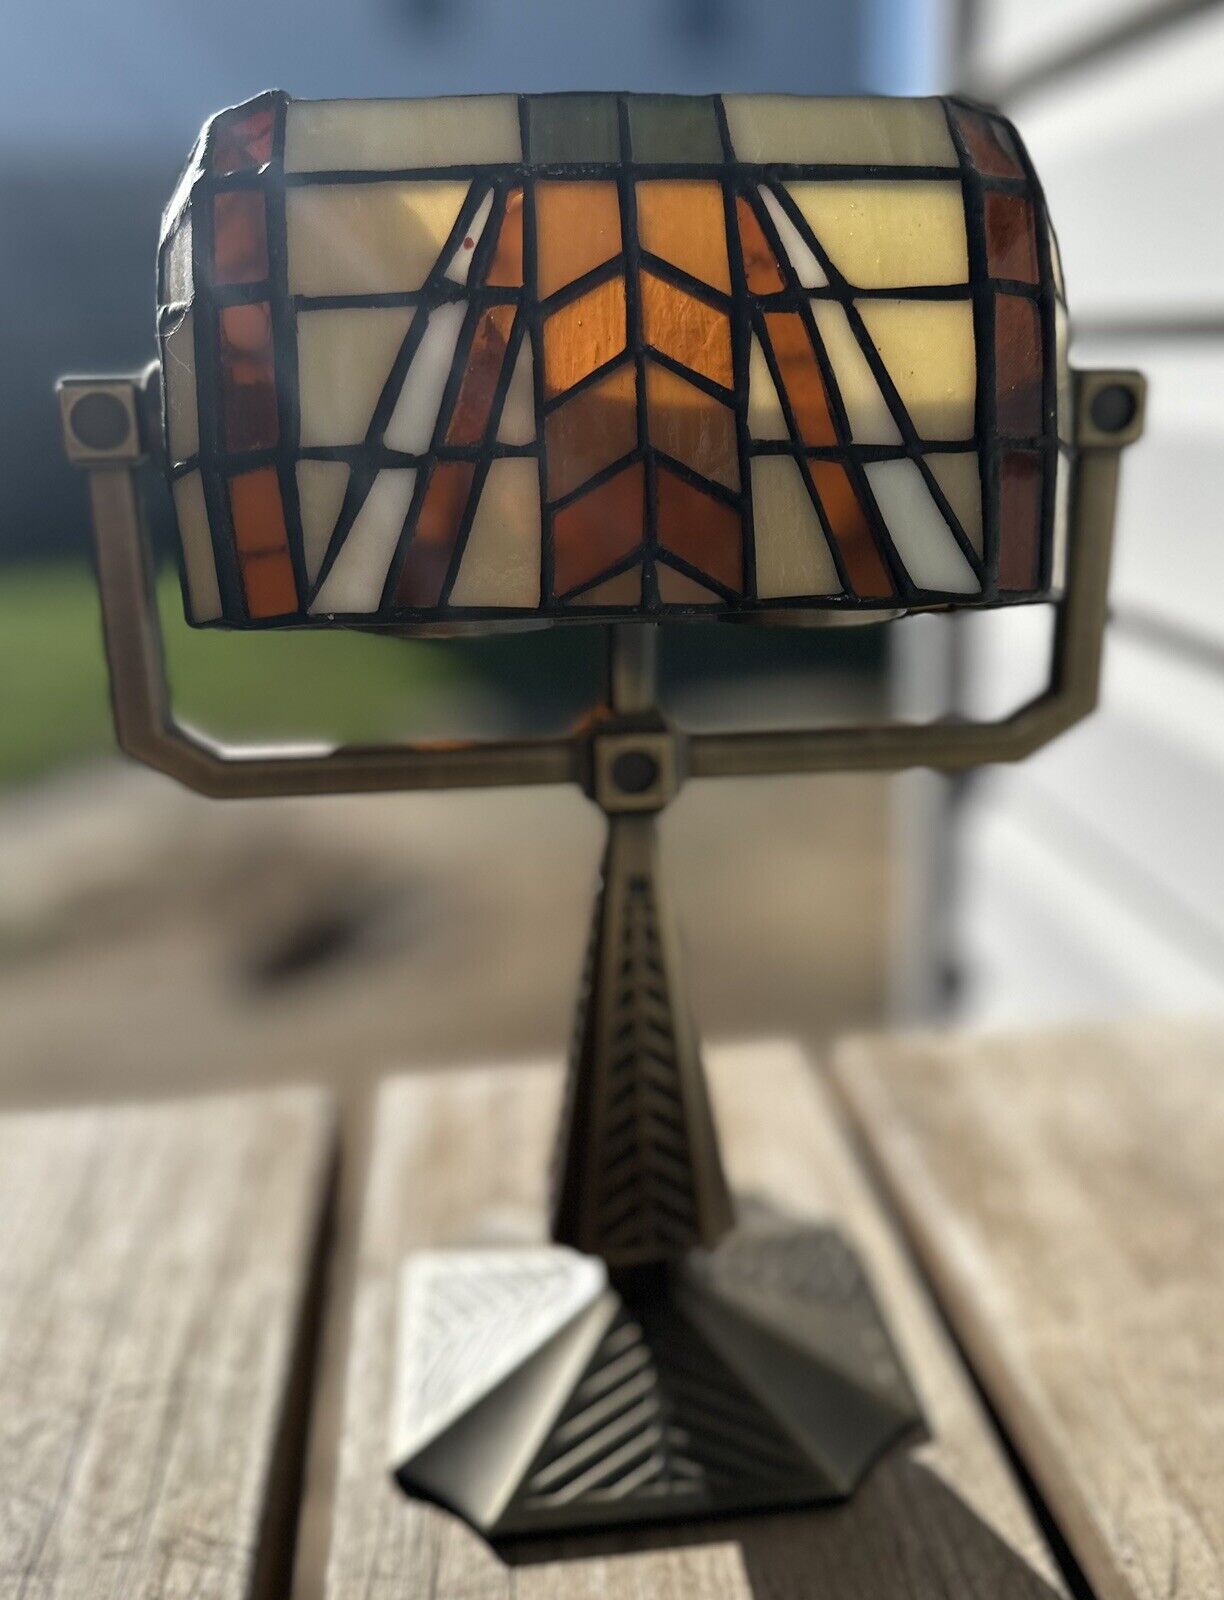 PartyLite Deco Stained Glass Tiffany Style Tealight Holder Banker Lamp. EUC